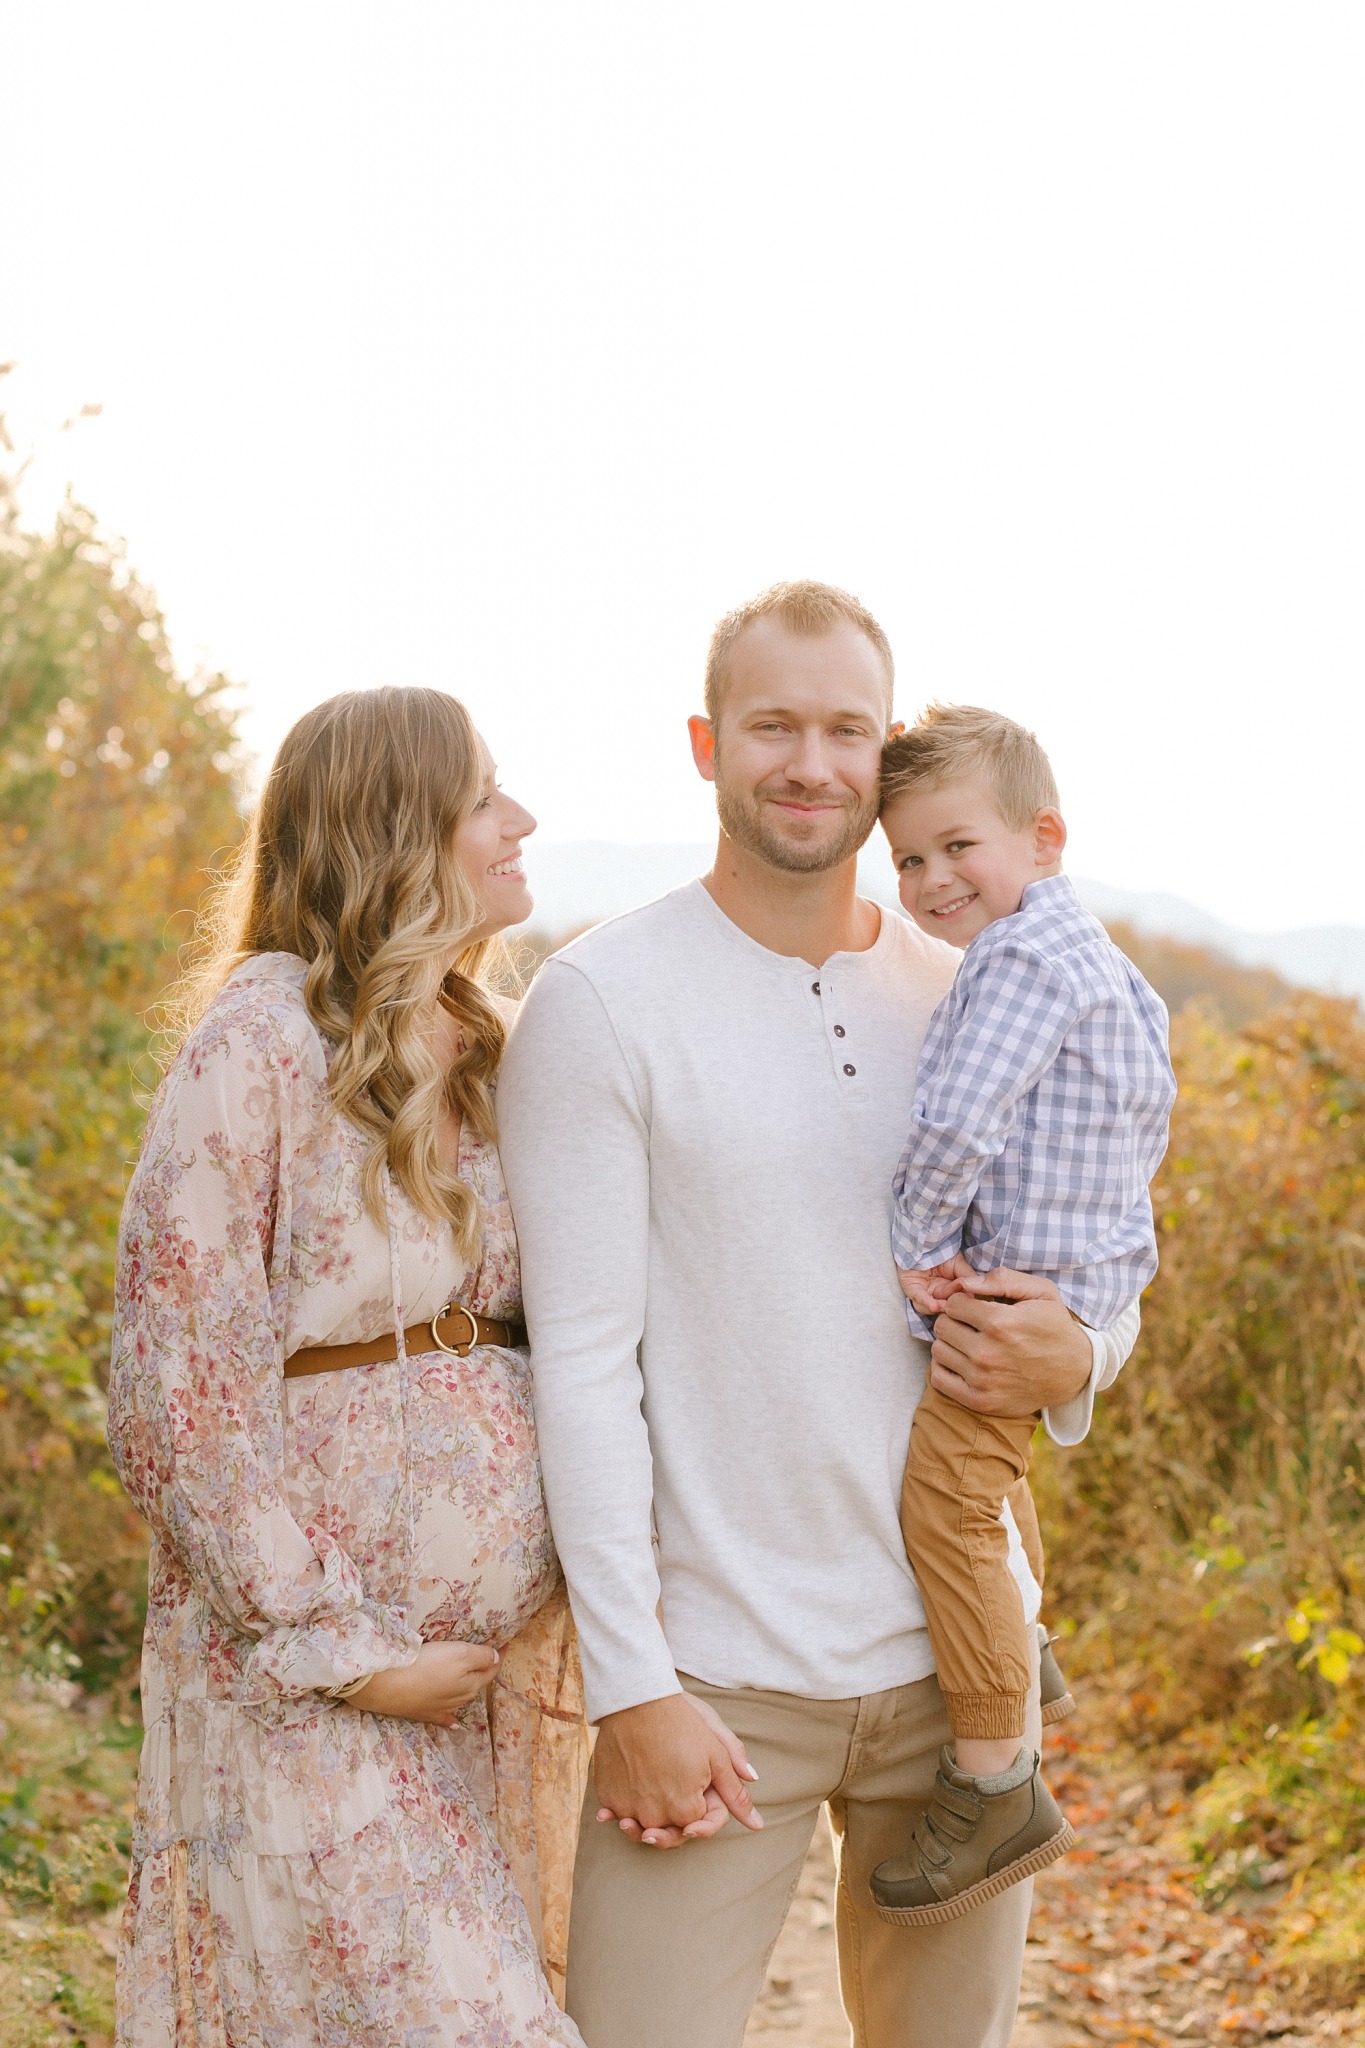 Max Patch maternity session in Asheville